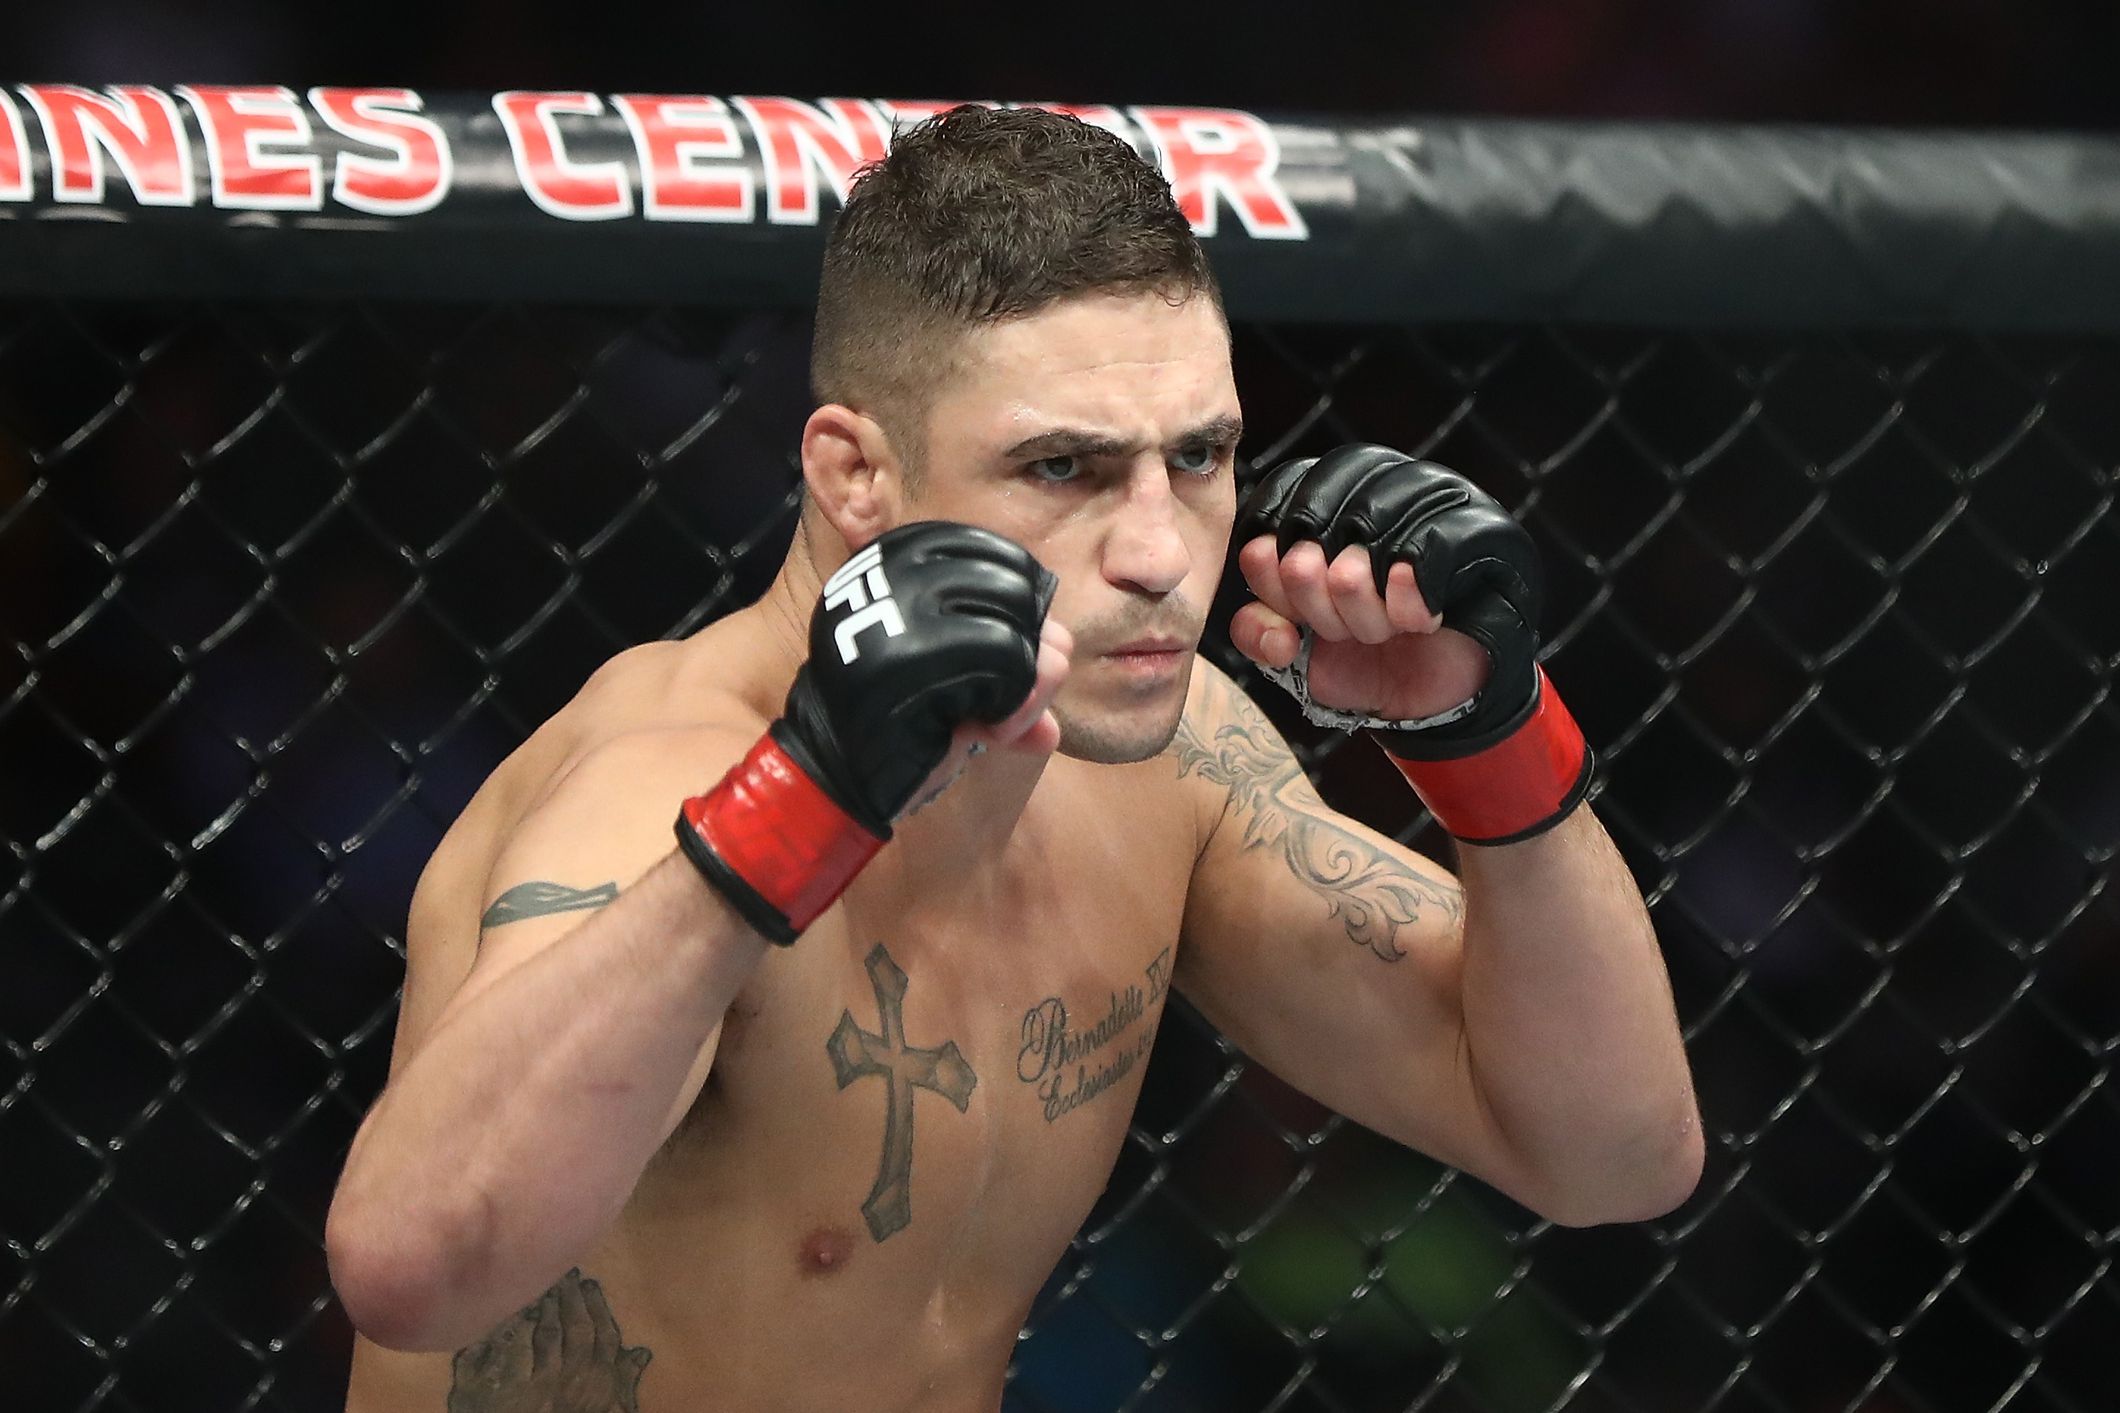 Diego Sanchez vs. Clay Guida earns spot in UFC Hall of Fame - Bloody Elbow
